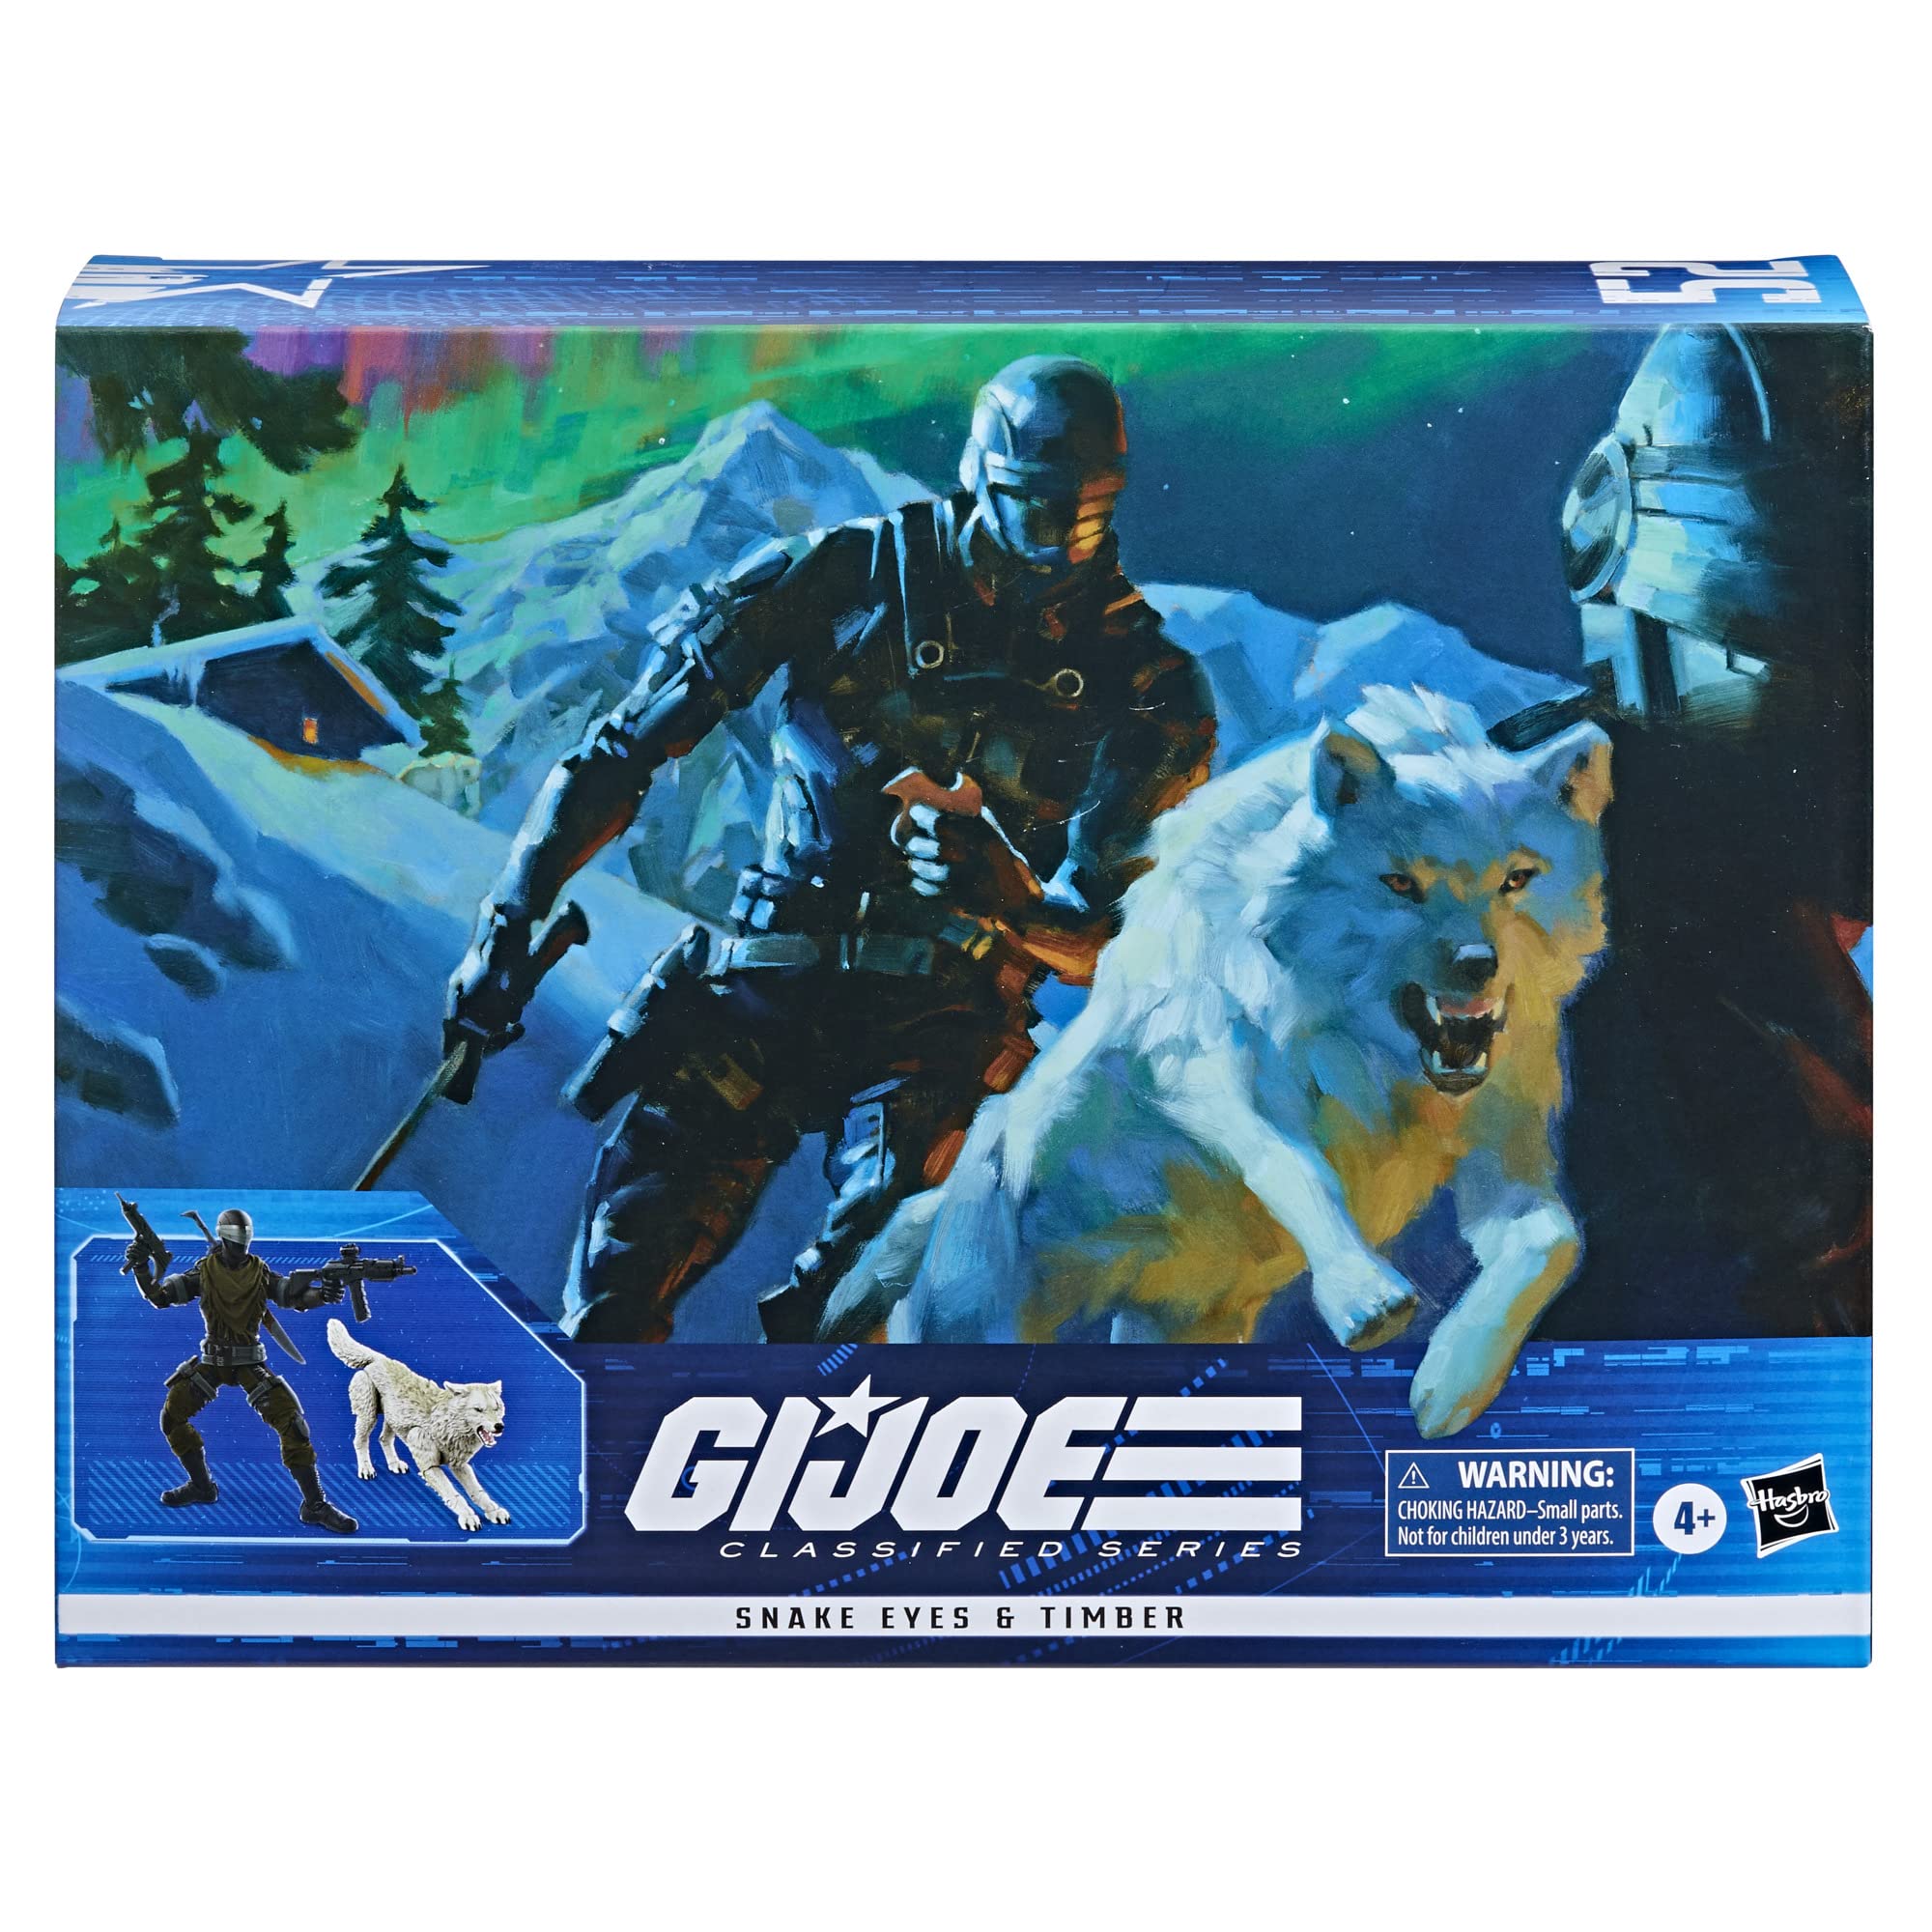 G. I. Joe Wolf Classified Series Snake Eyes & Timber Action Figures 52 Collectible Premium Toys, 6-Inch Scale, Custom Package Art, F4321